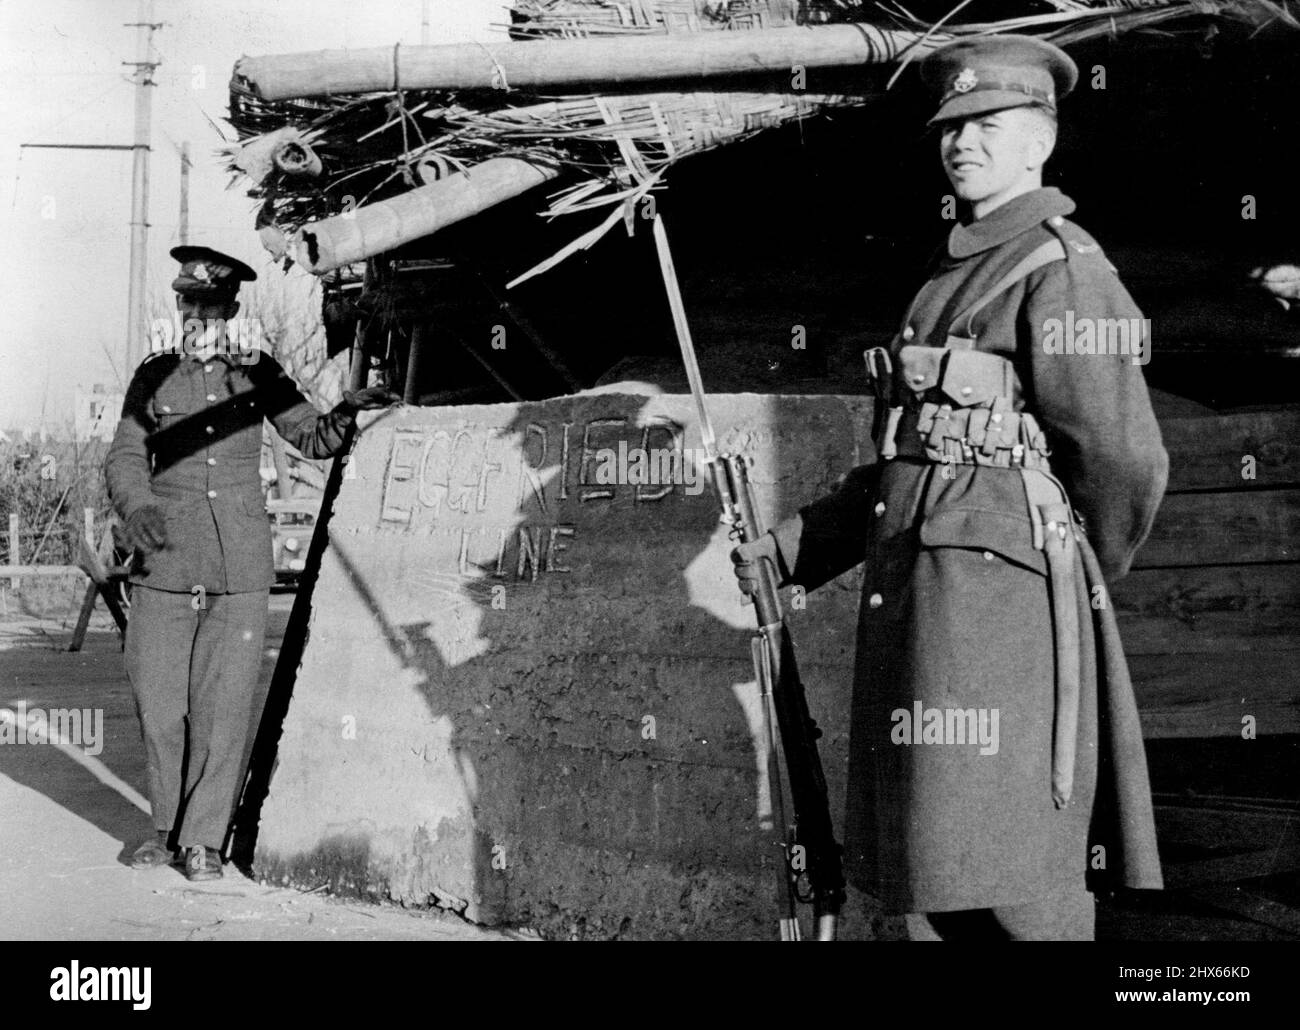 British Troops In China From 1937 Onwards. March 4, 1940. (Photo by Press Union Photo Service). Stock Photo